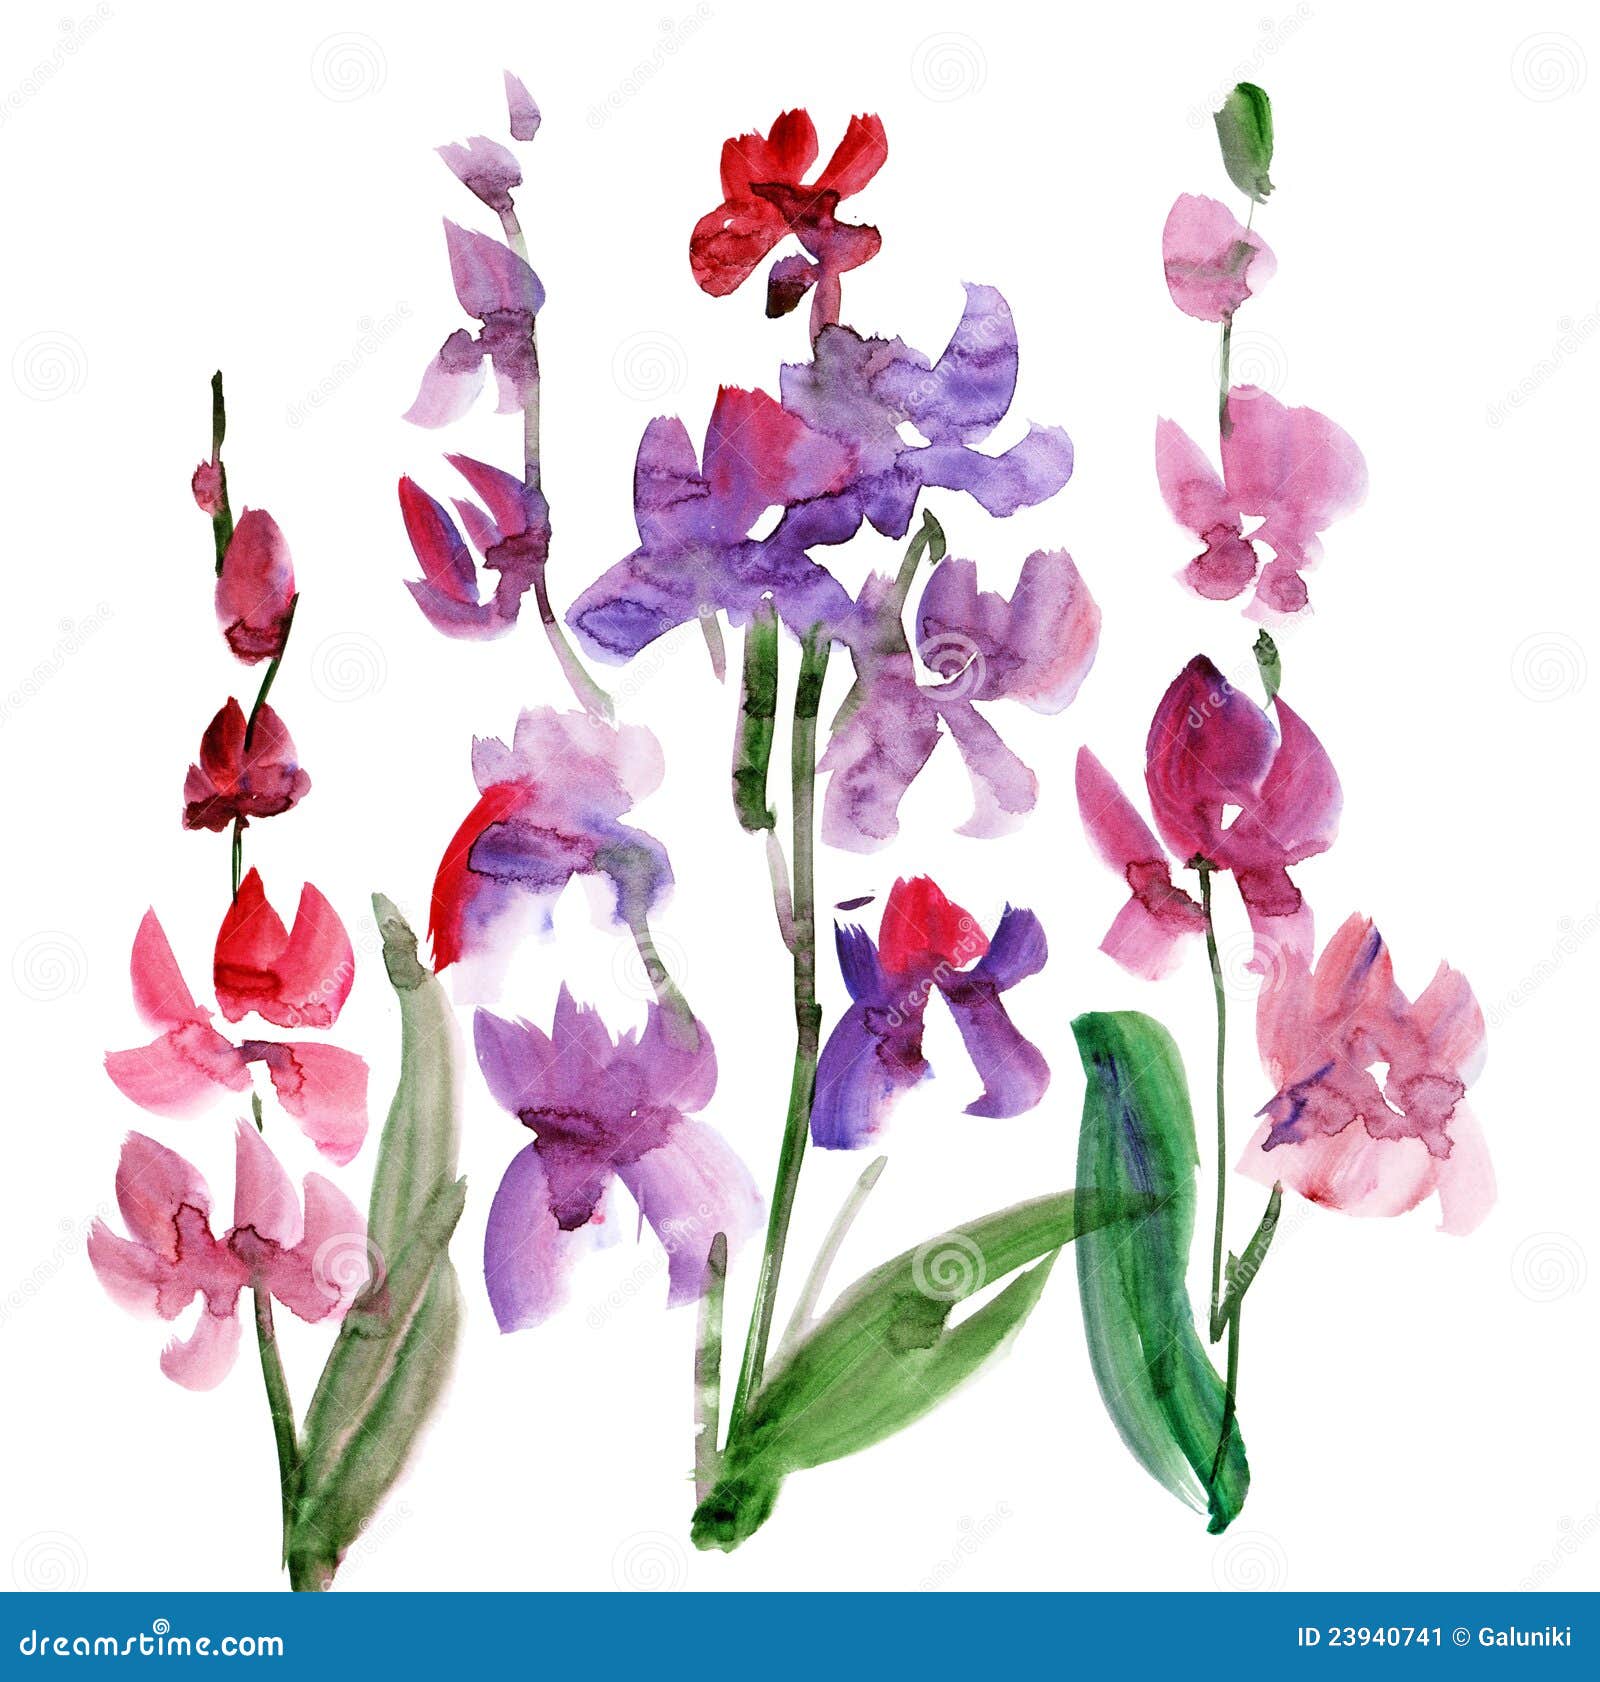 tumblr aesthetic drawings Flower  Watercolour Image Orchid Stock Image: 23940741